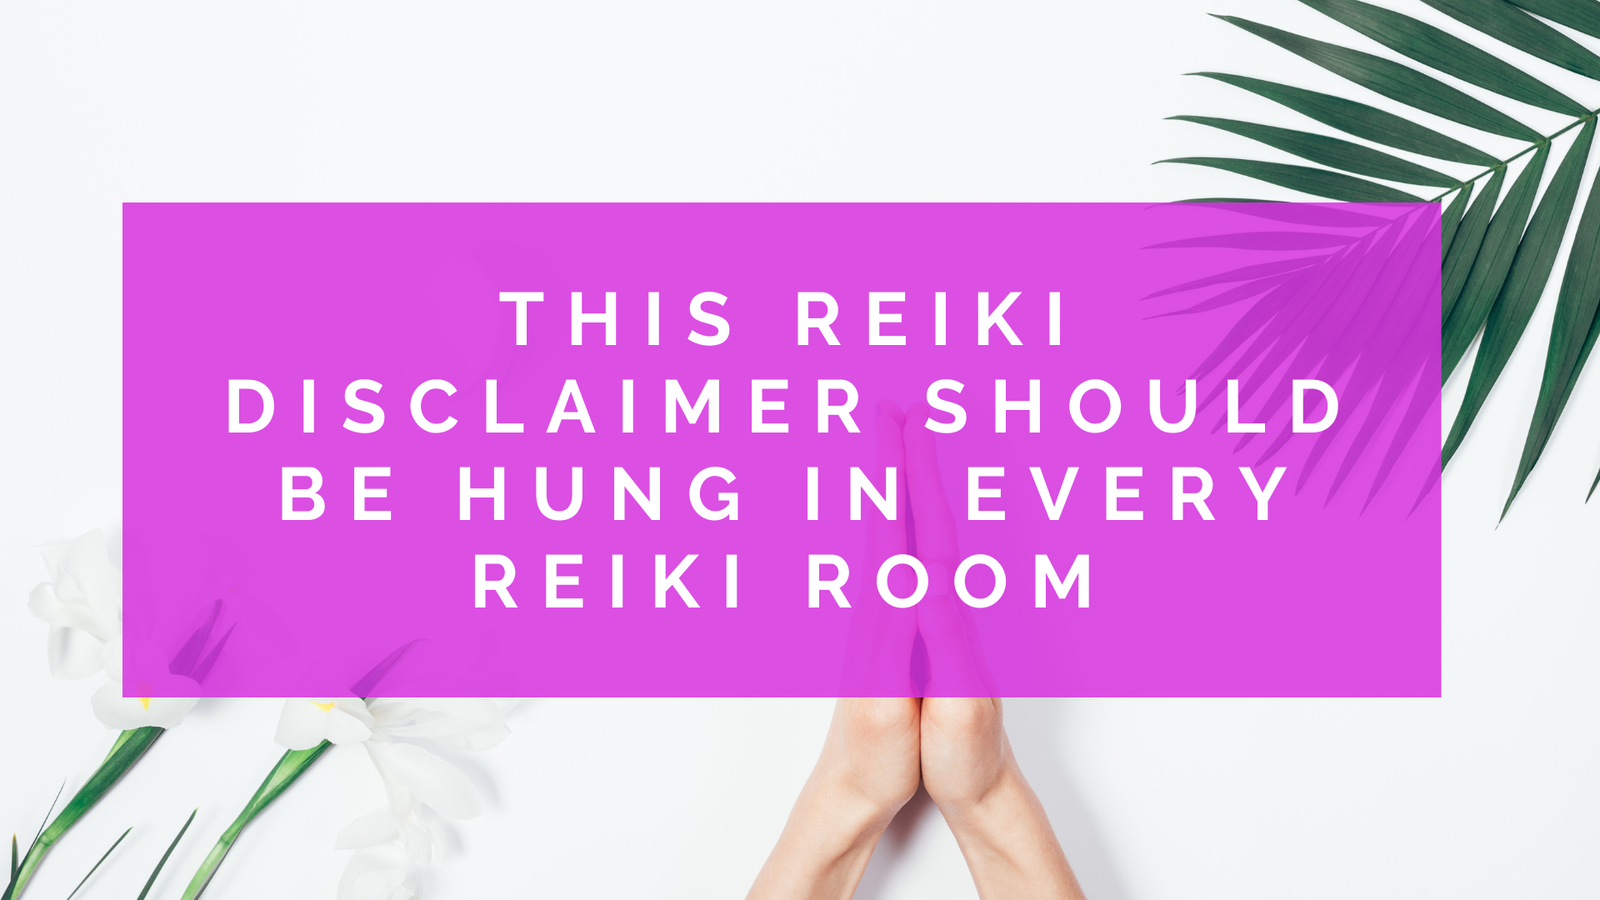 This Reiki Disclaimer Should be Hung in Every Reiki Room